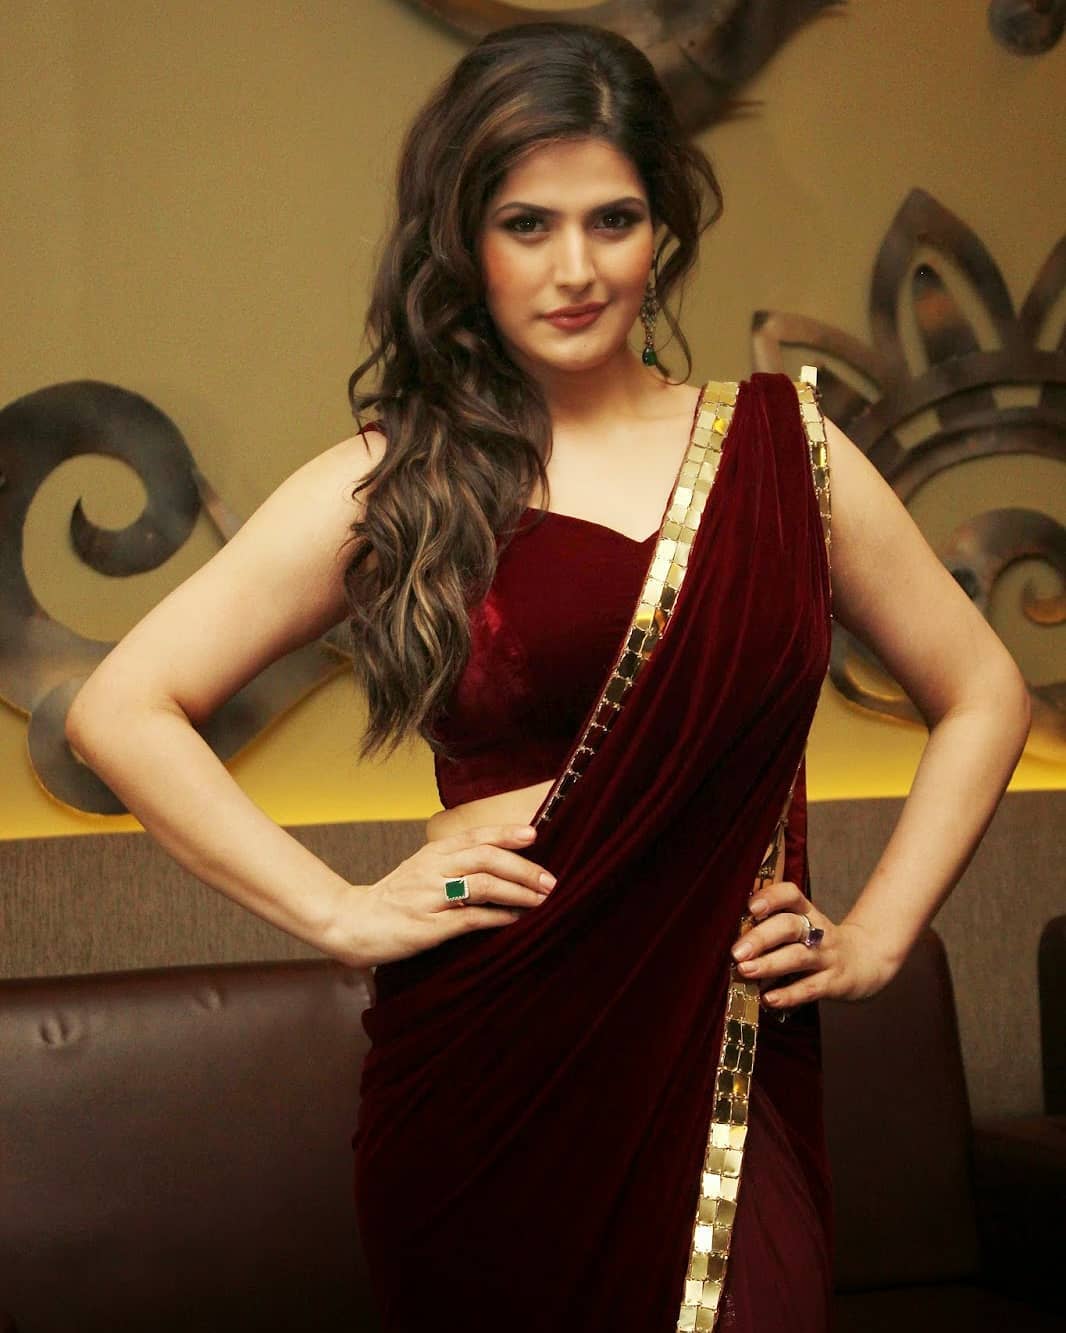 Karine Khan Showcasting Her Most Amazing Curves In A Maroon Revealing Saree